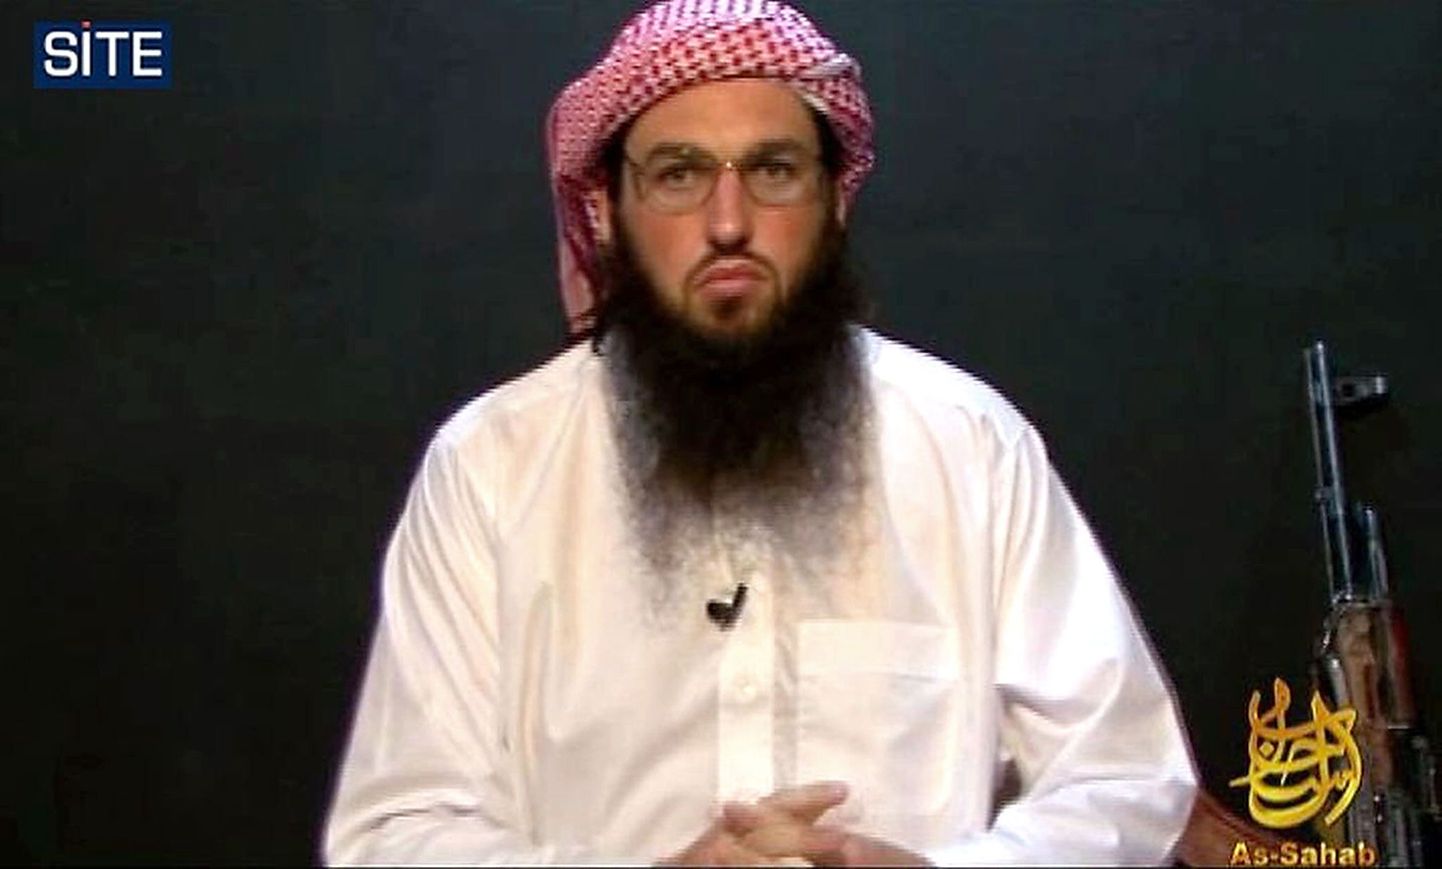 A still image released by the Site Intelligence Group on October 23, 2010 shows Al-Qaeda's American spokesman Adam Gadahn delivering a video message, produced by Al-Qaeda's media arm As-Sahab, in which he urges fellow Muslims in the West to carry out attacks in the "Zio-Crusader coalition" states, SITE Intelligence Group said. AFP PHOTO/HO/SITE INTELLIGENCE GROUP == RESTRICTED TO EDITORIAL USE ==